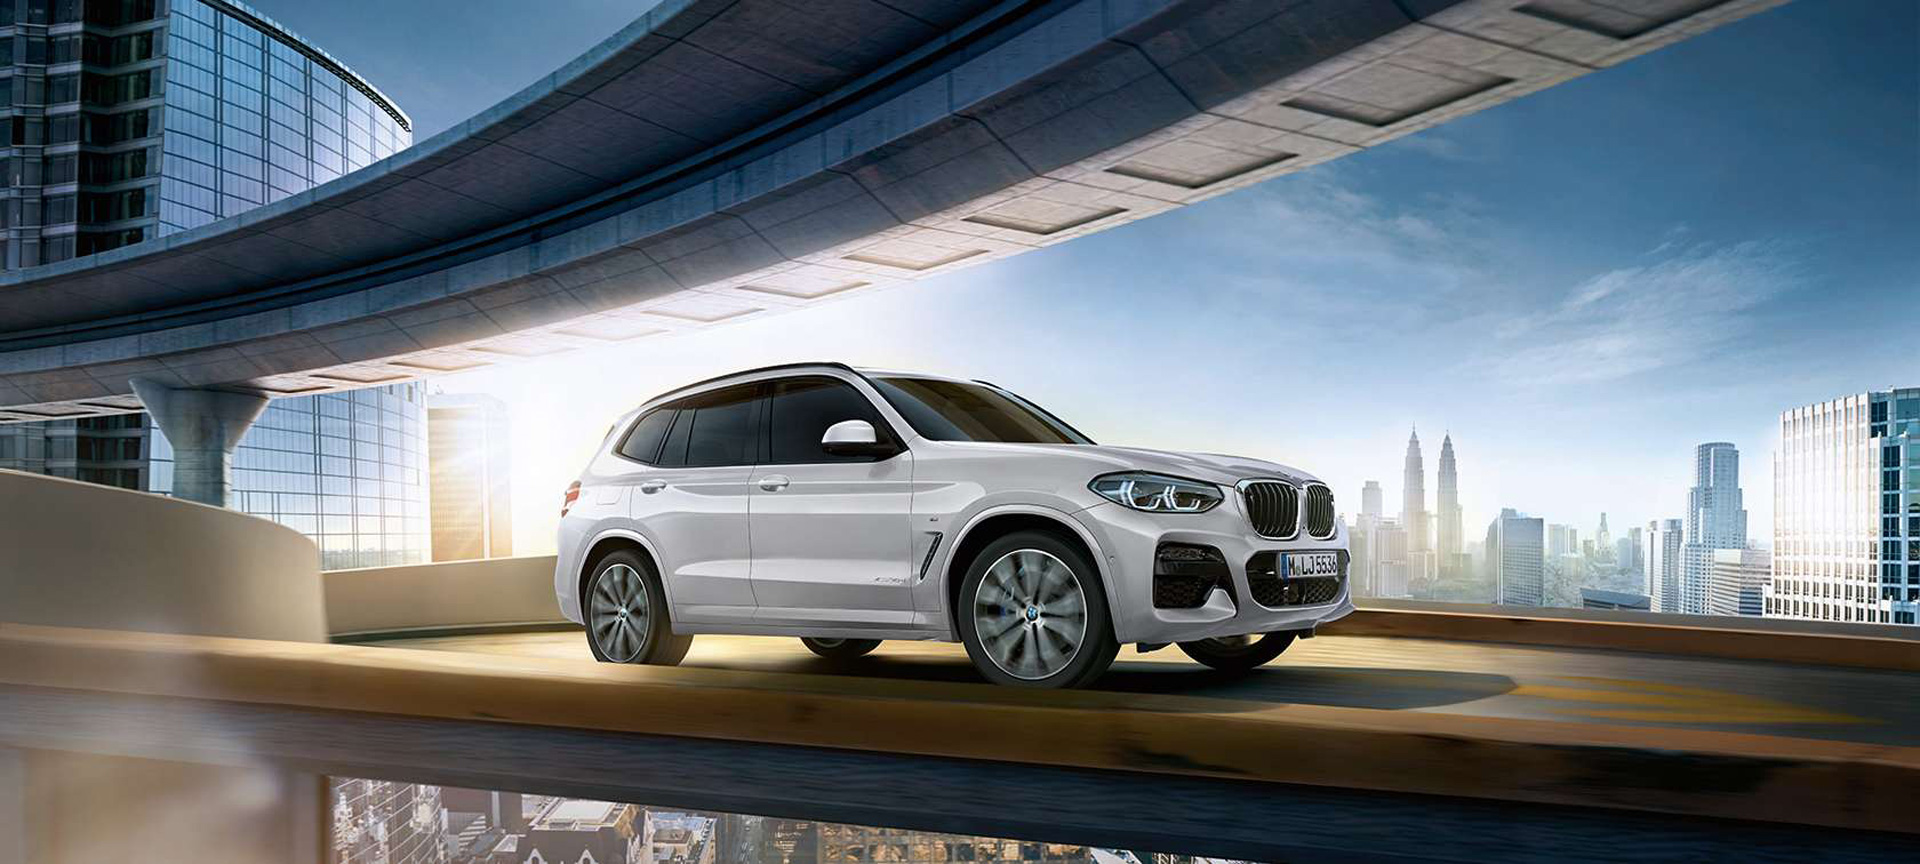 ON A MISSION.
THE ALL-NEW BMW X3.
Find out more 
